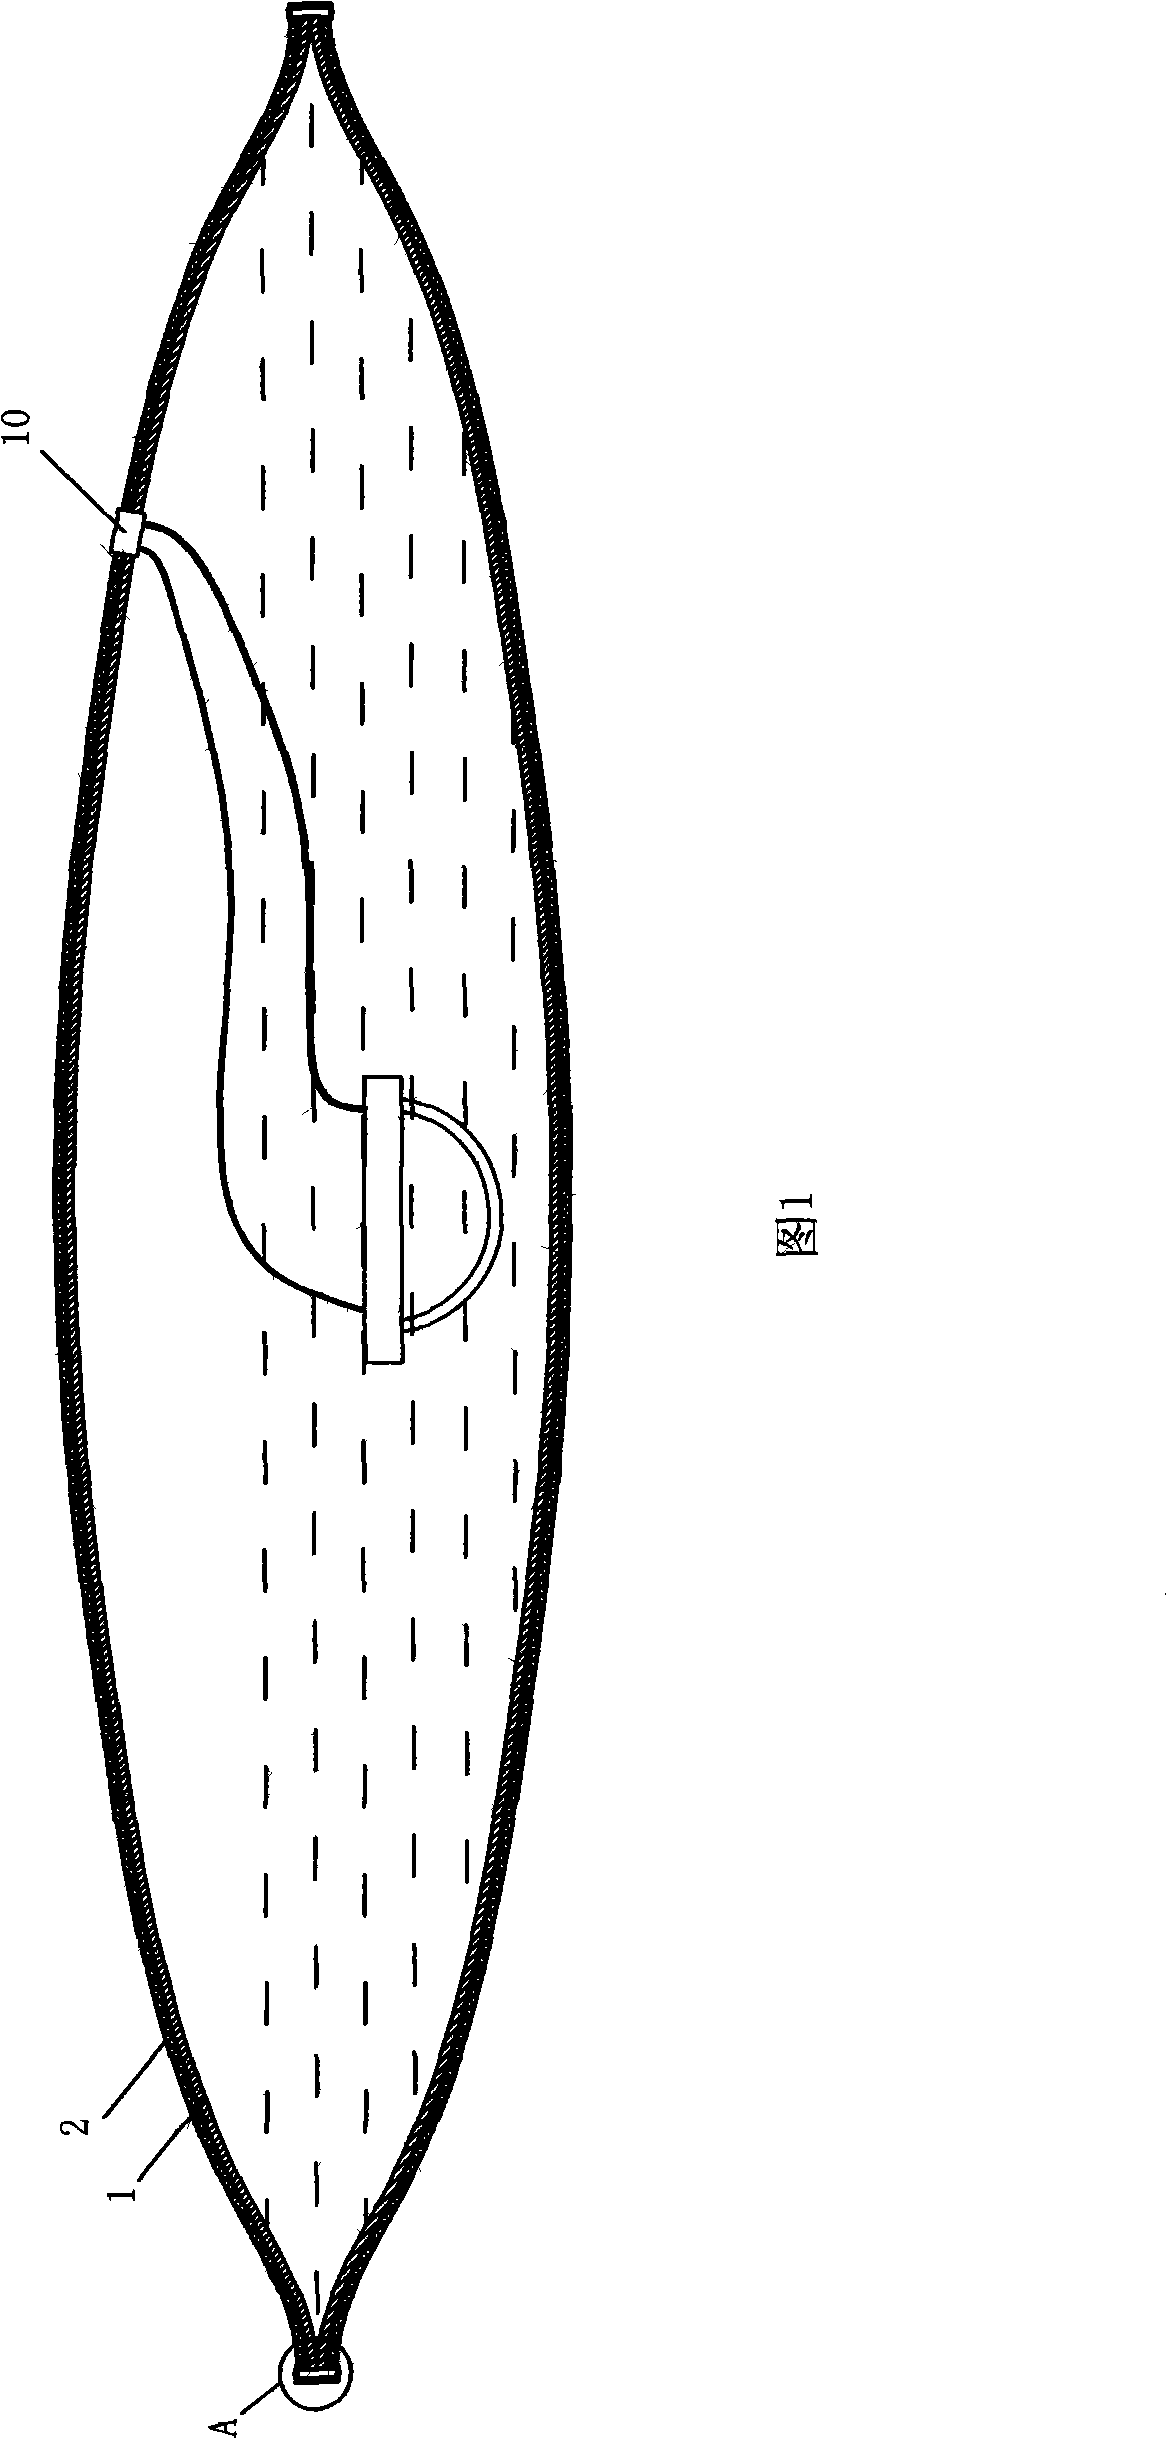 Electric warm water bag and manufacturing method therefor